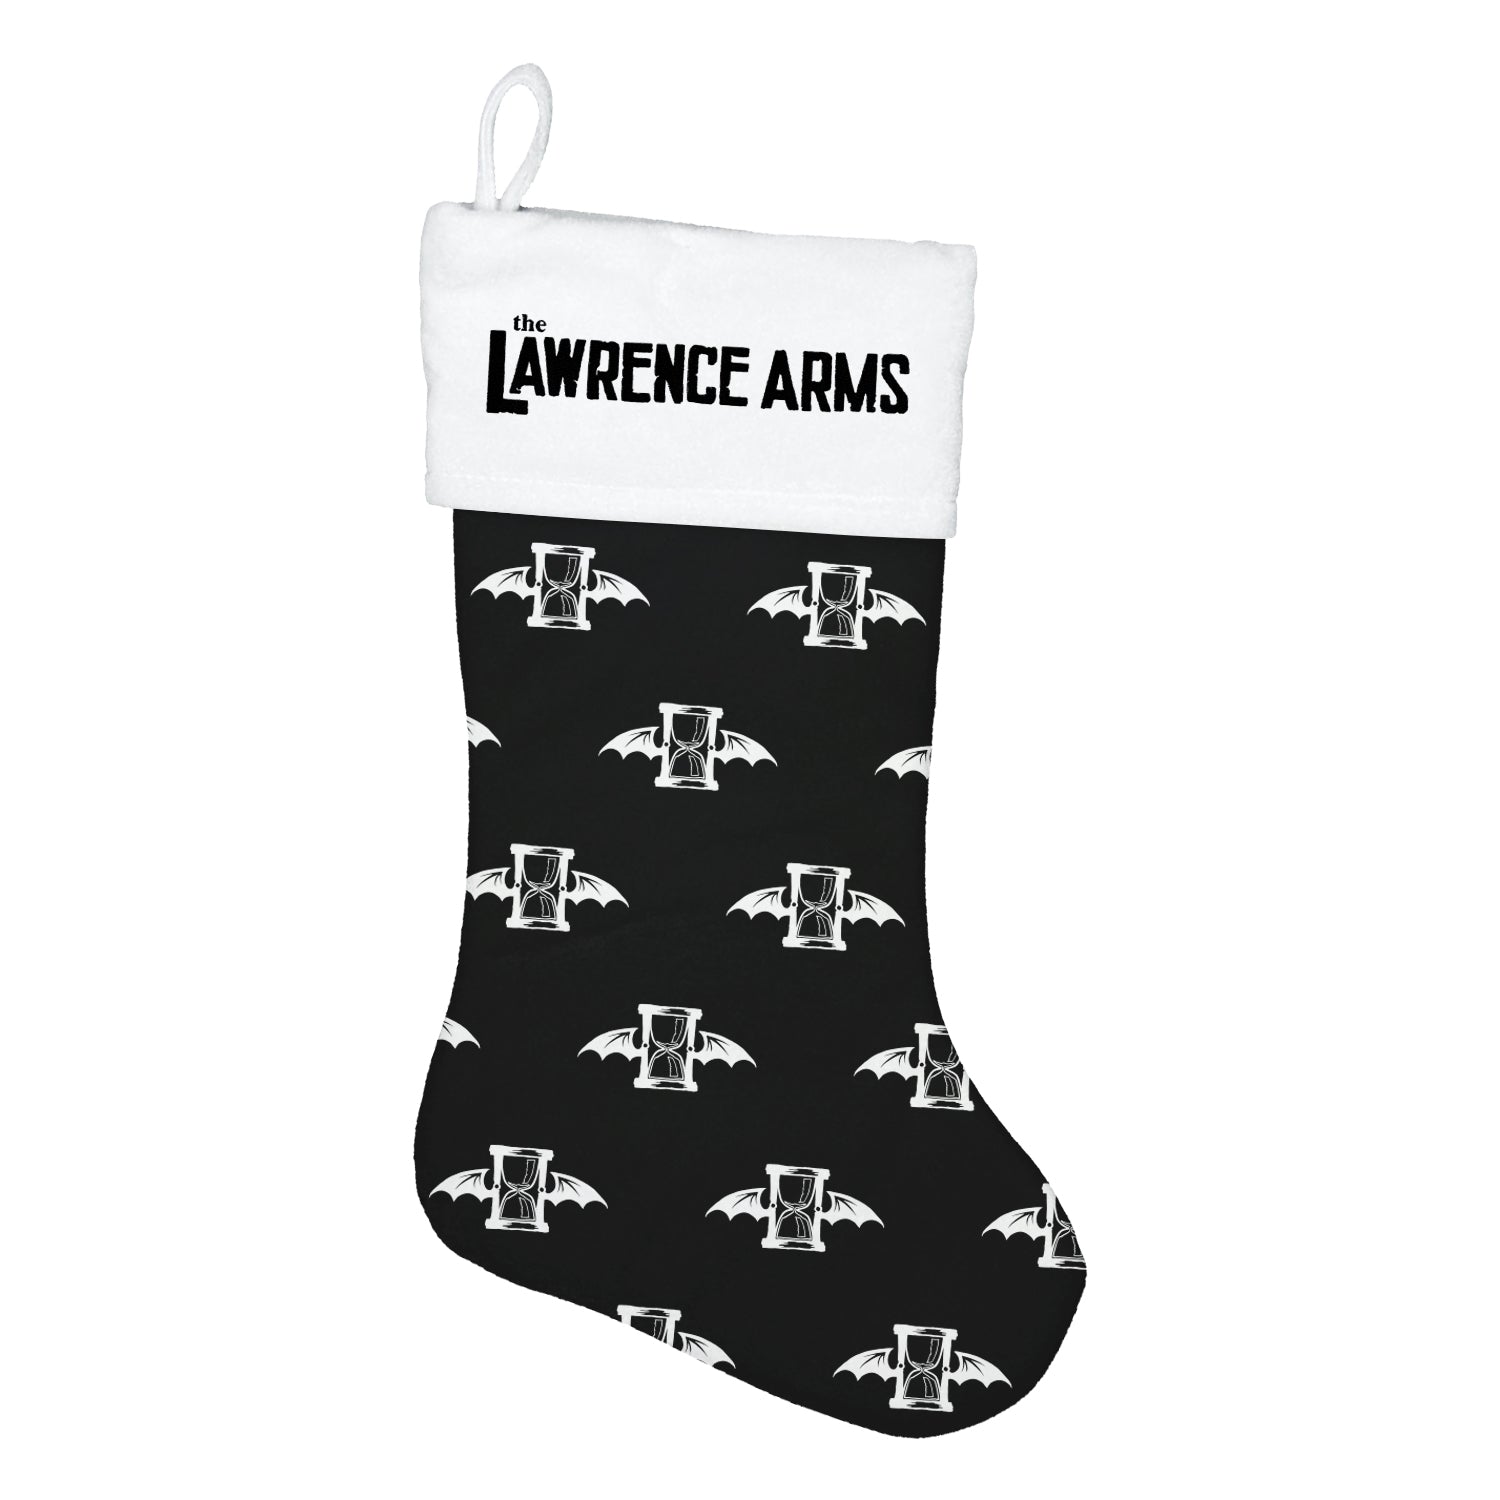 Image of a black and white christmas stocking against a white background. The top of the stocking is white and has black text that says "the lawrence arms". Below that, the rest of the stocking is black and features white the lawrence arms logos all over it. The logo is an hourglass with wings.